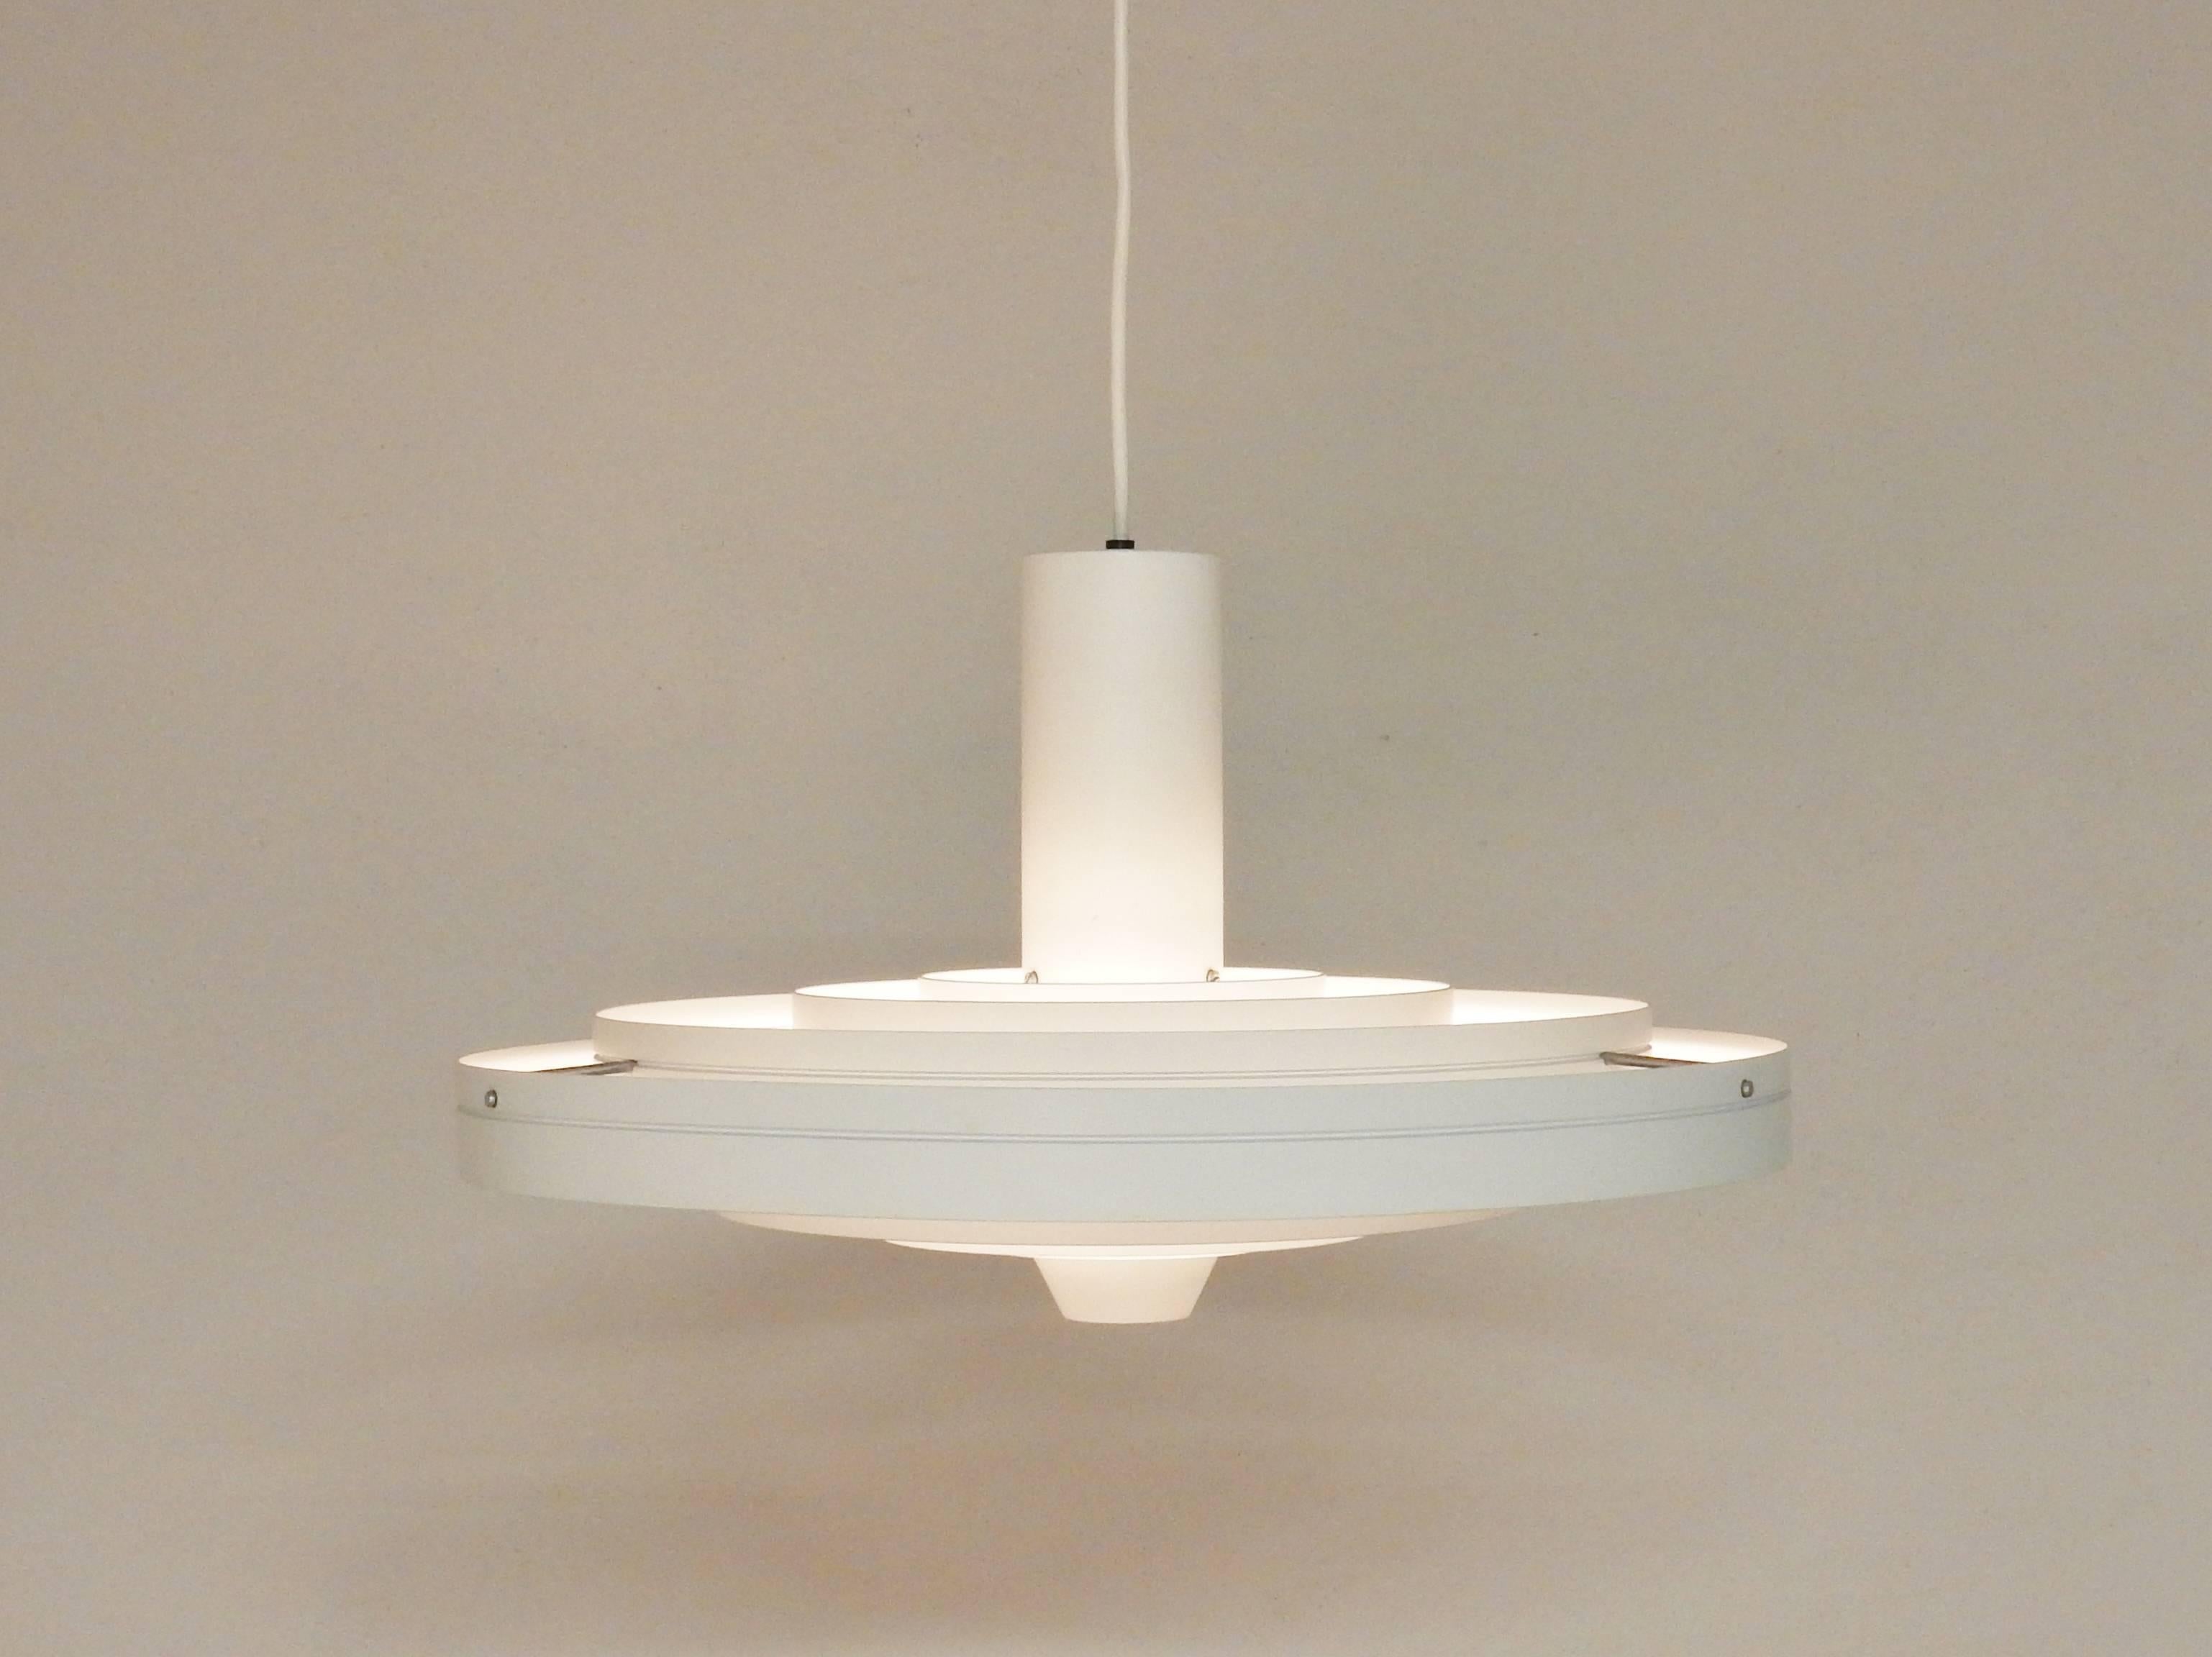 Beautiful pendant light of an airy and minimal design that would fit almost any interior. With a Ø of 47cm it is a perfect light for a dining table or other occasion.
This light is in a very good condition with minor signs of age and use.

The